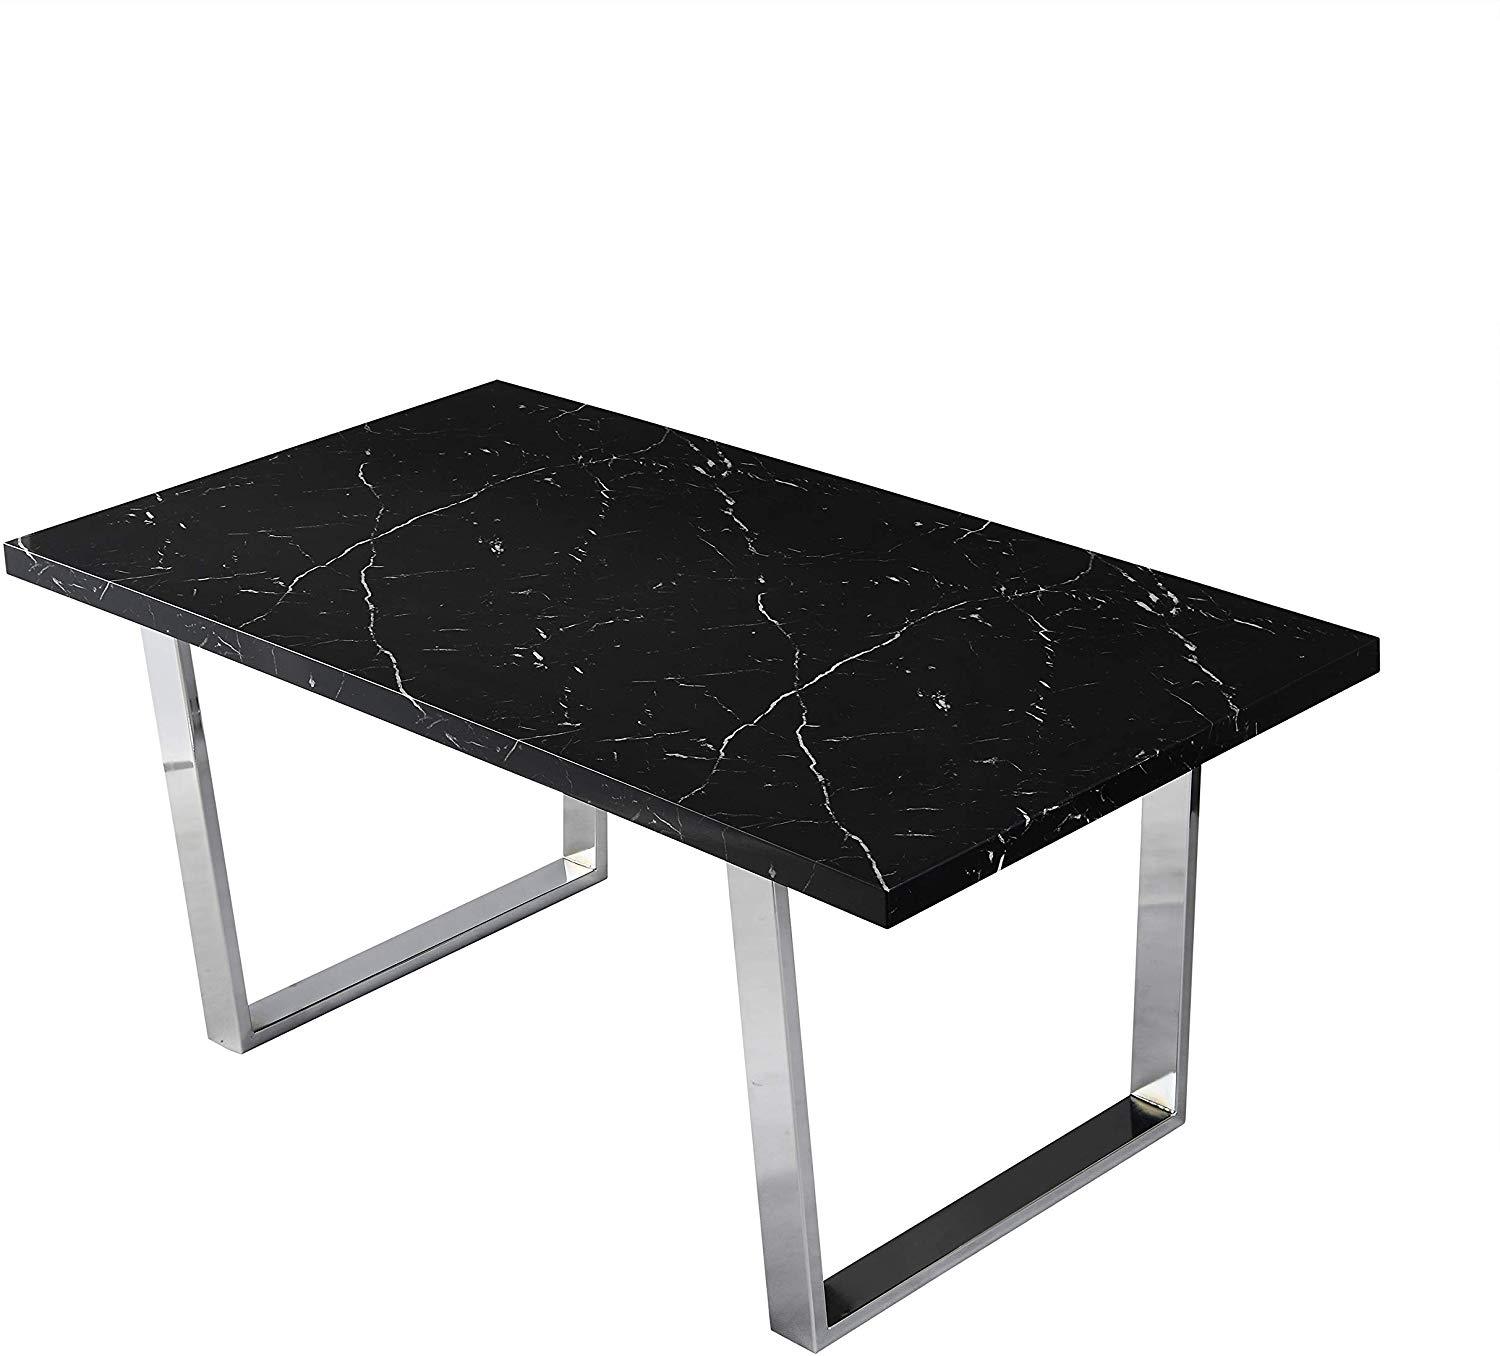 BIASCA 6-Seater High Gloss Marble Effect Dining Table with ... on {keyword}